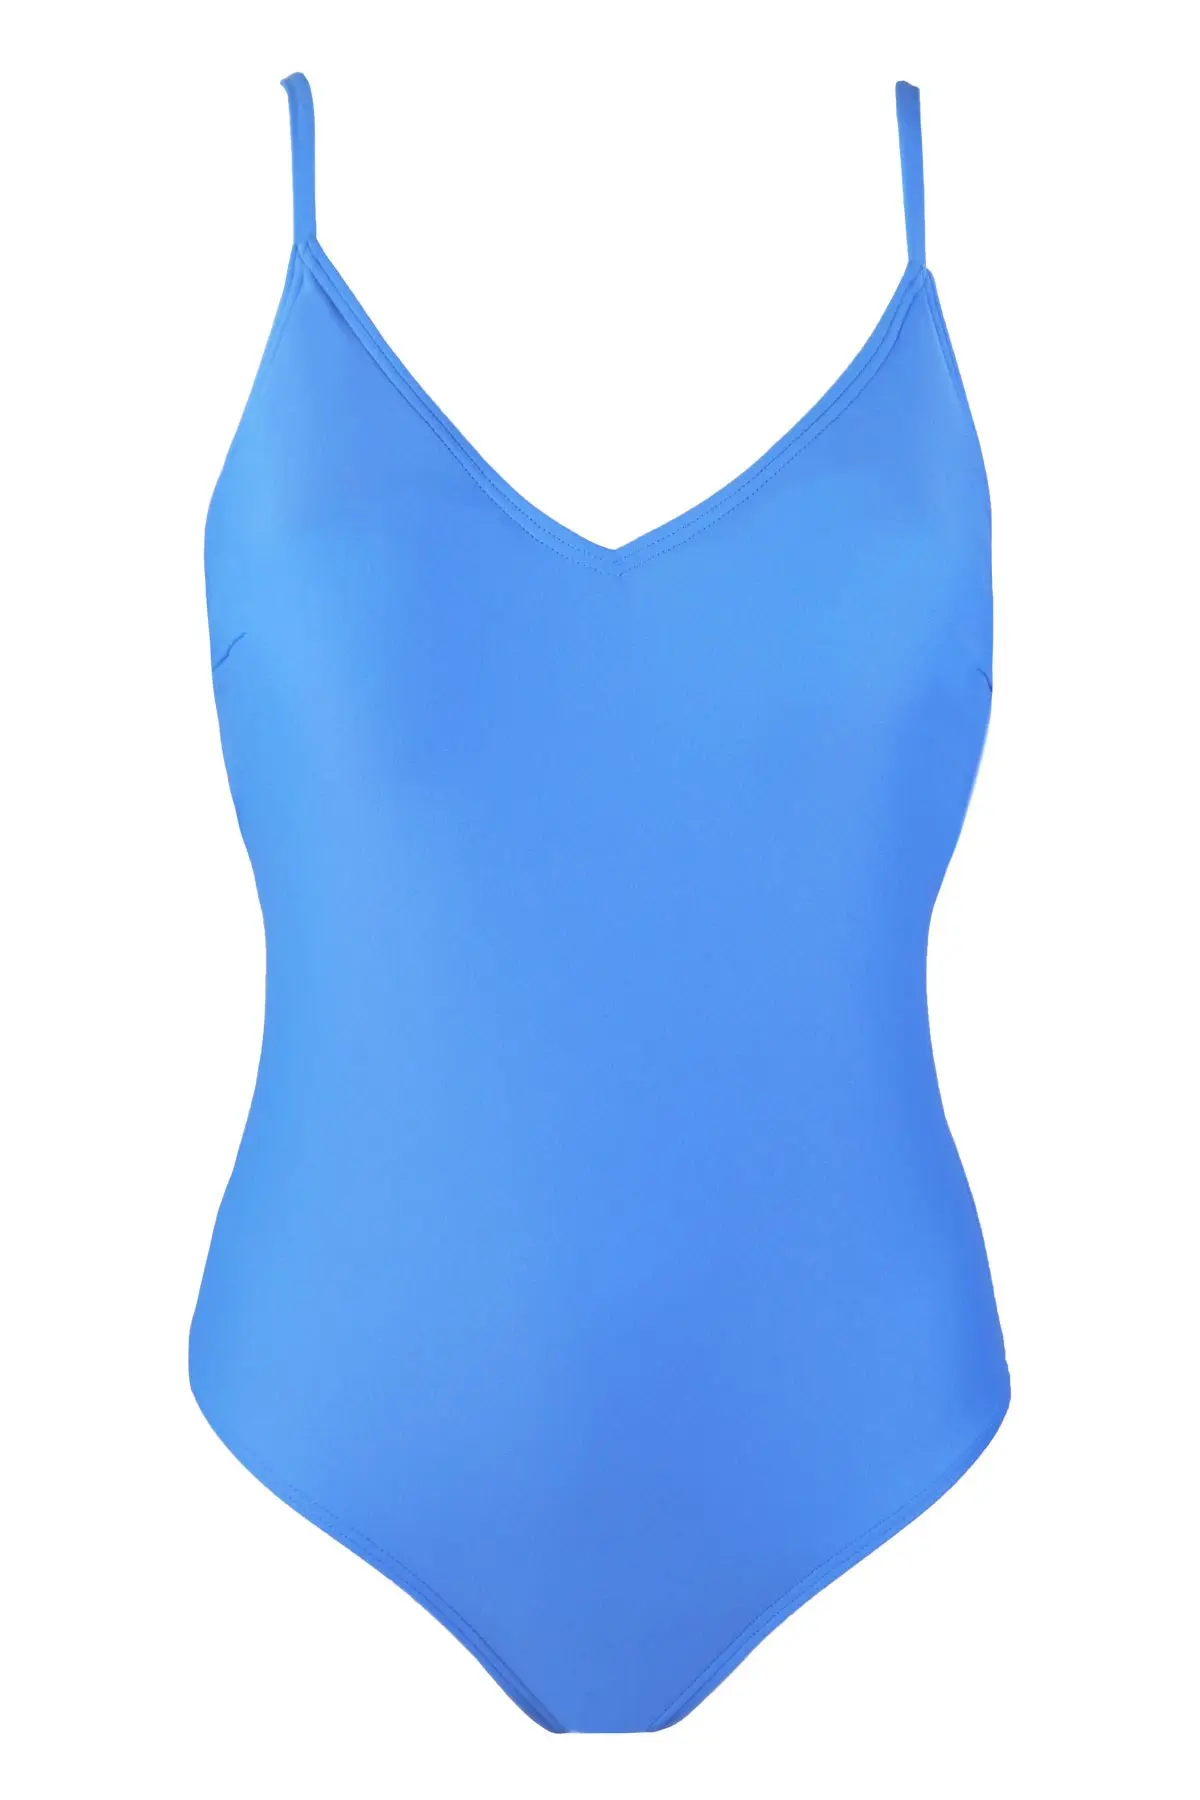 Getaway Strapped Swimsuit | Pour Moi | Getaway Strapped Swimsuit | Blue ...